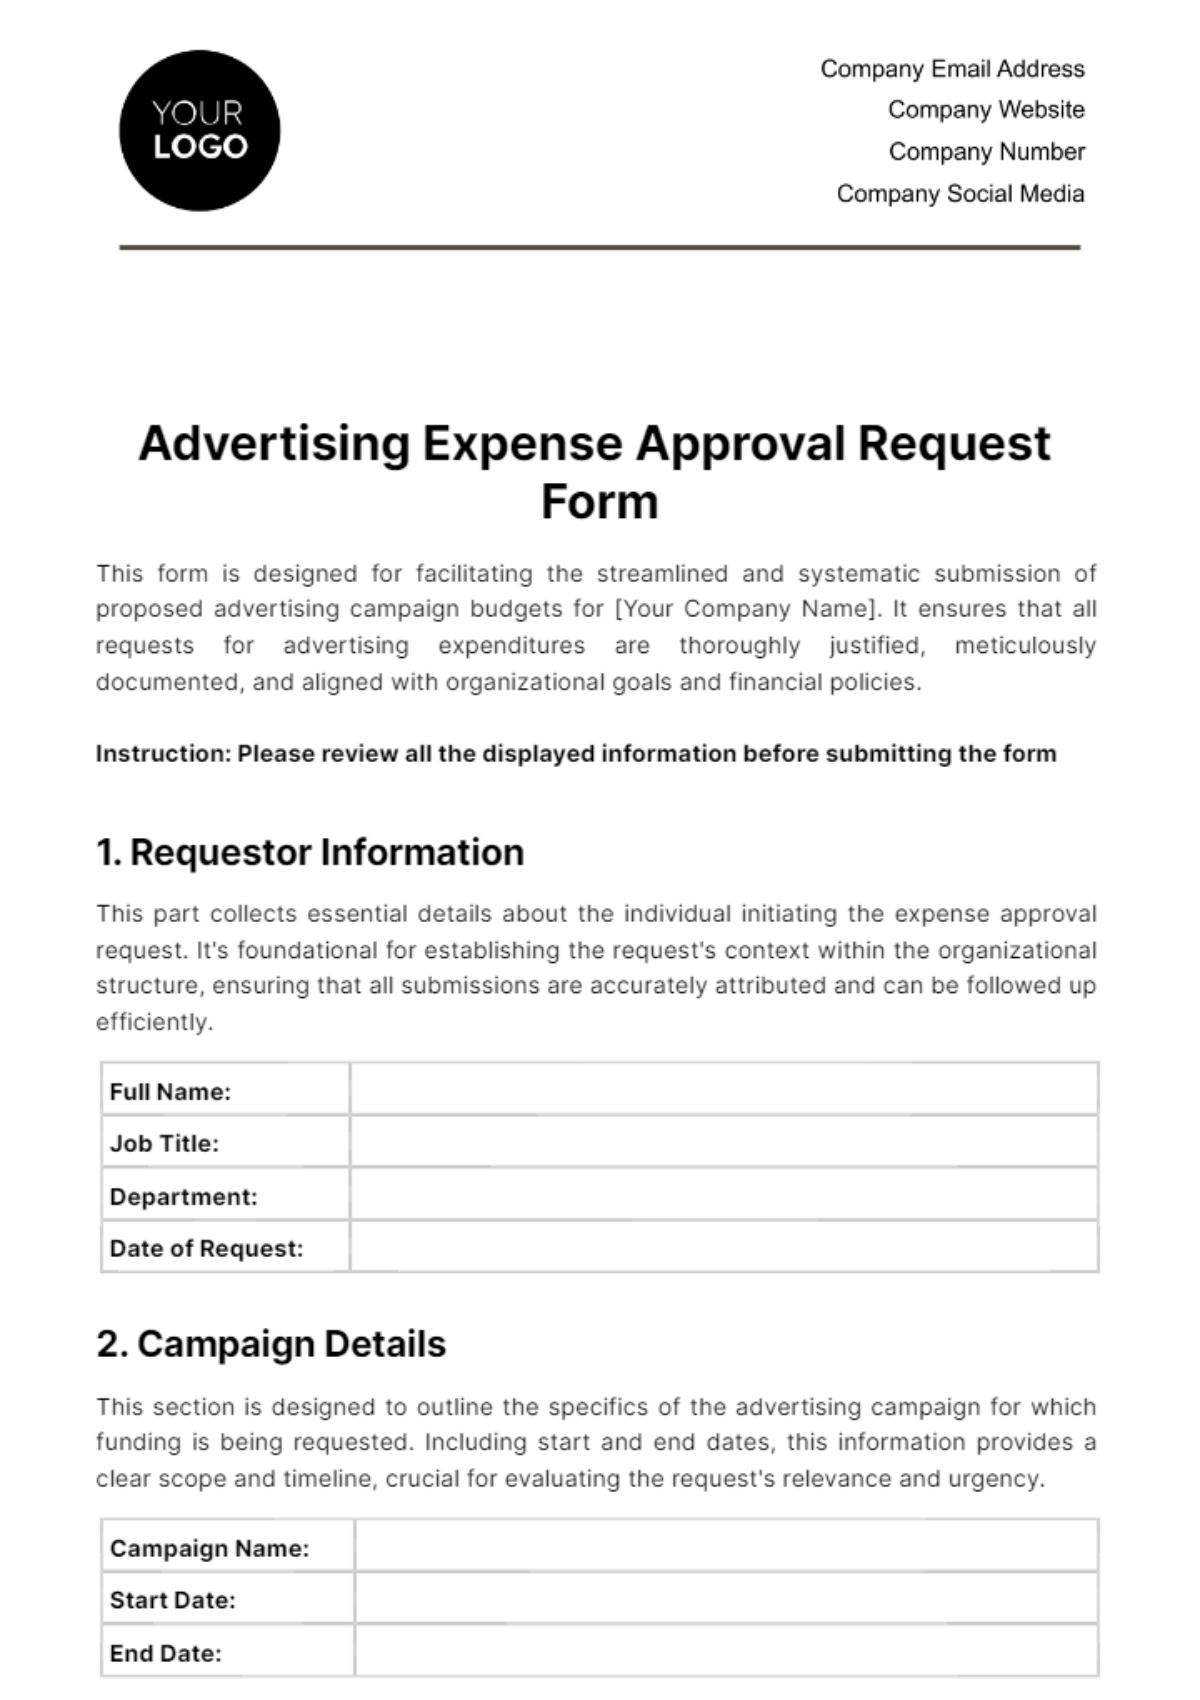 Advertising Expense Approval Request Form Template